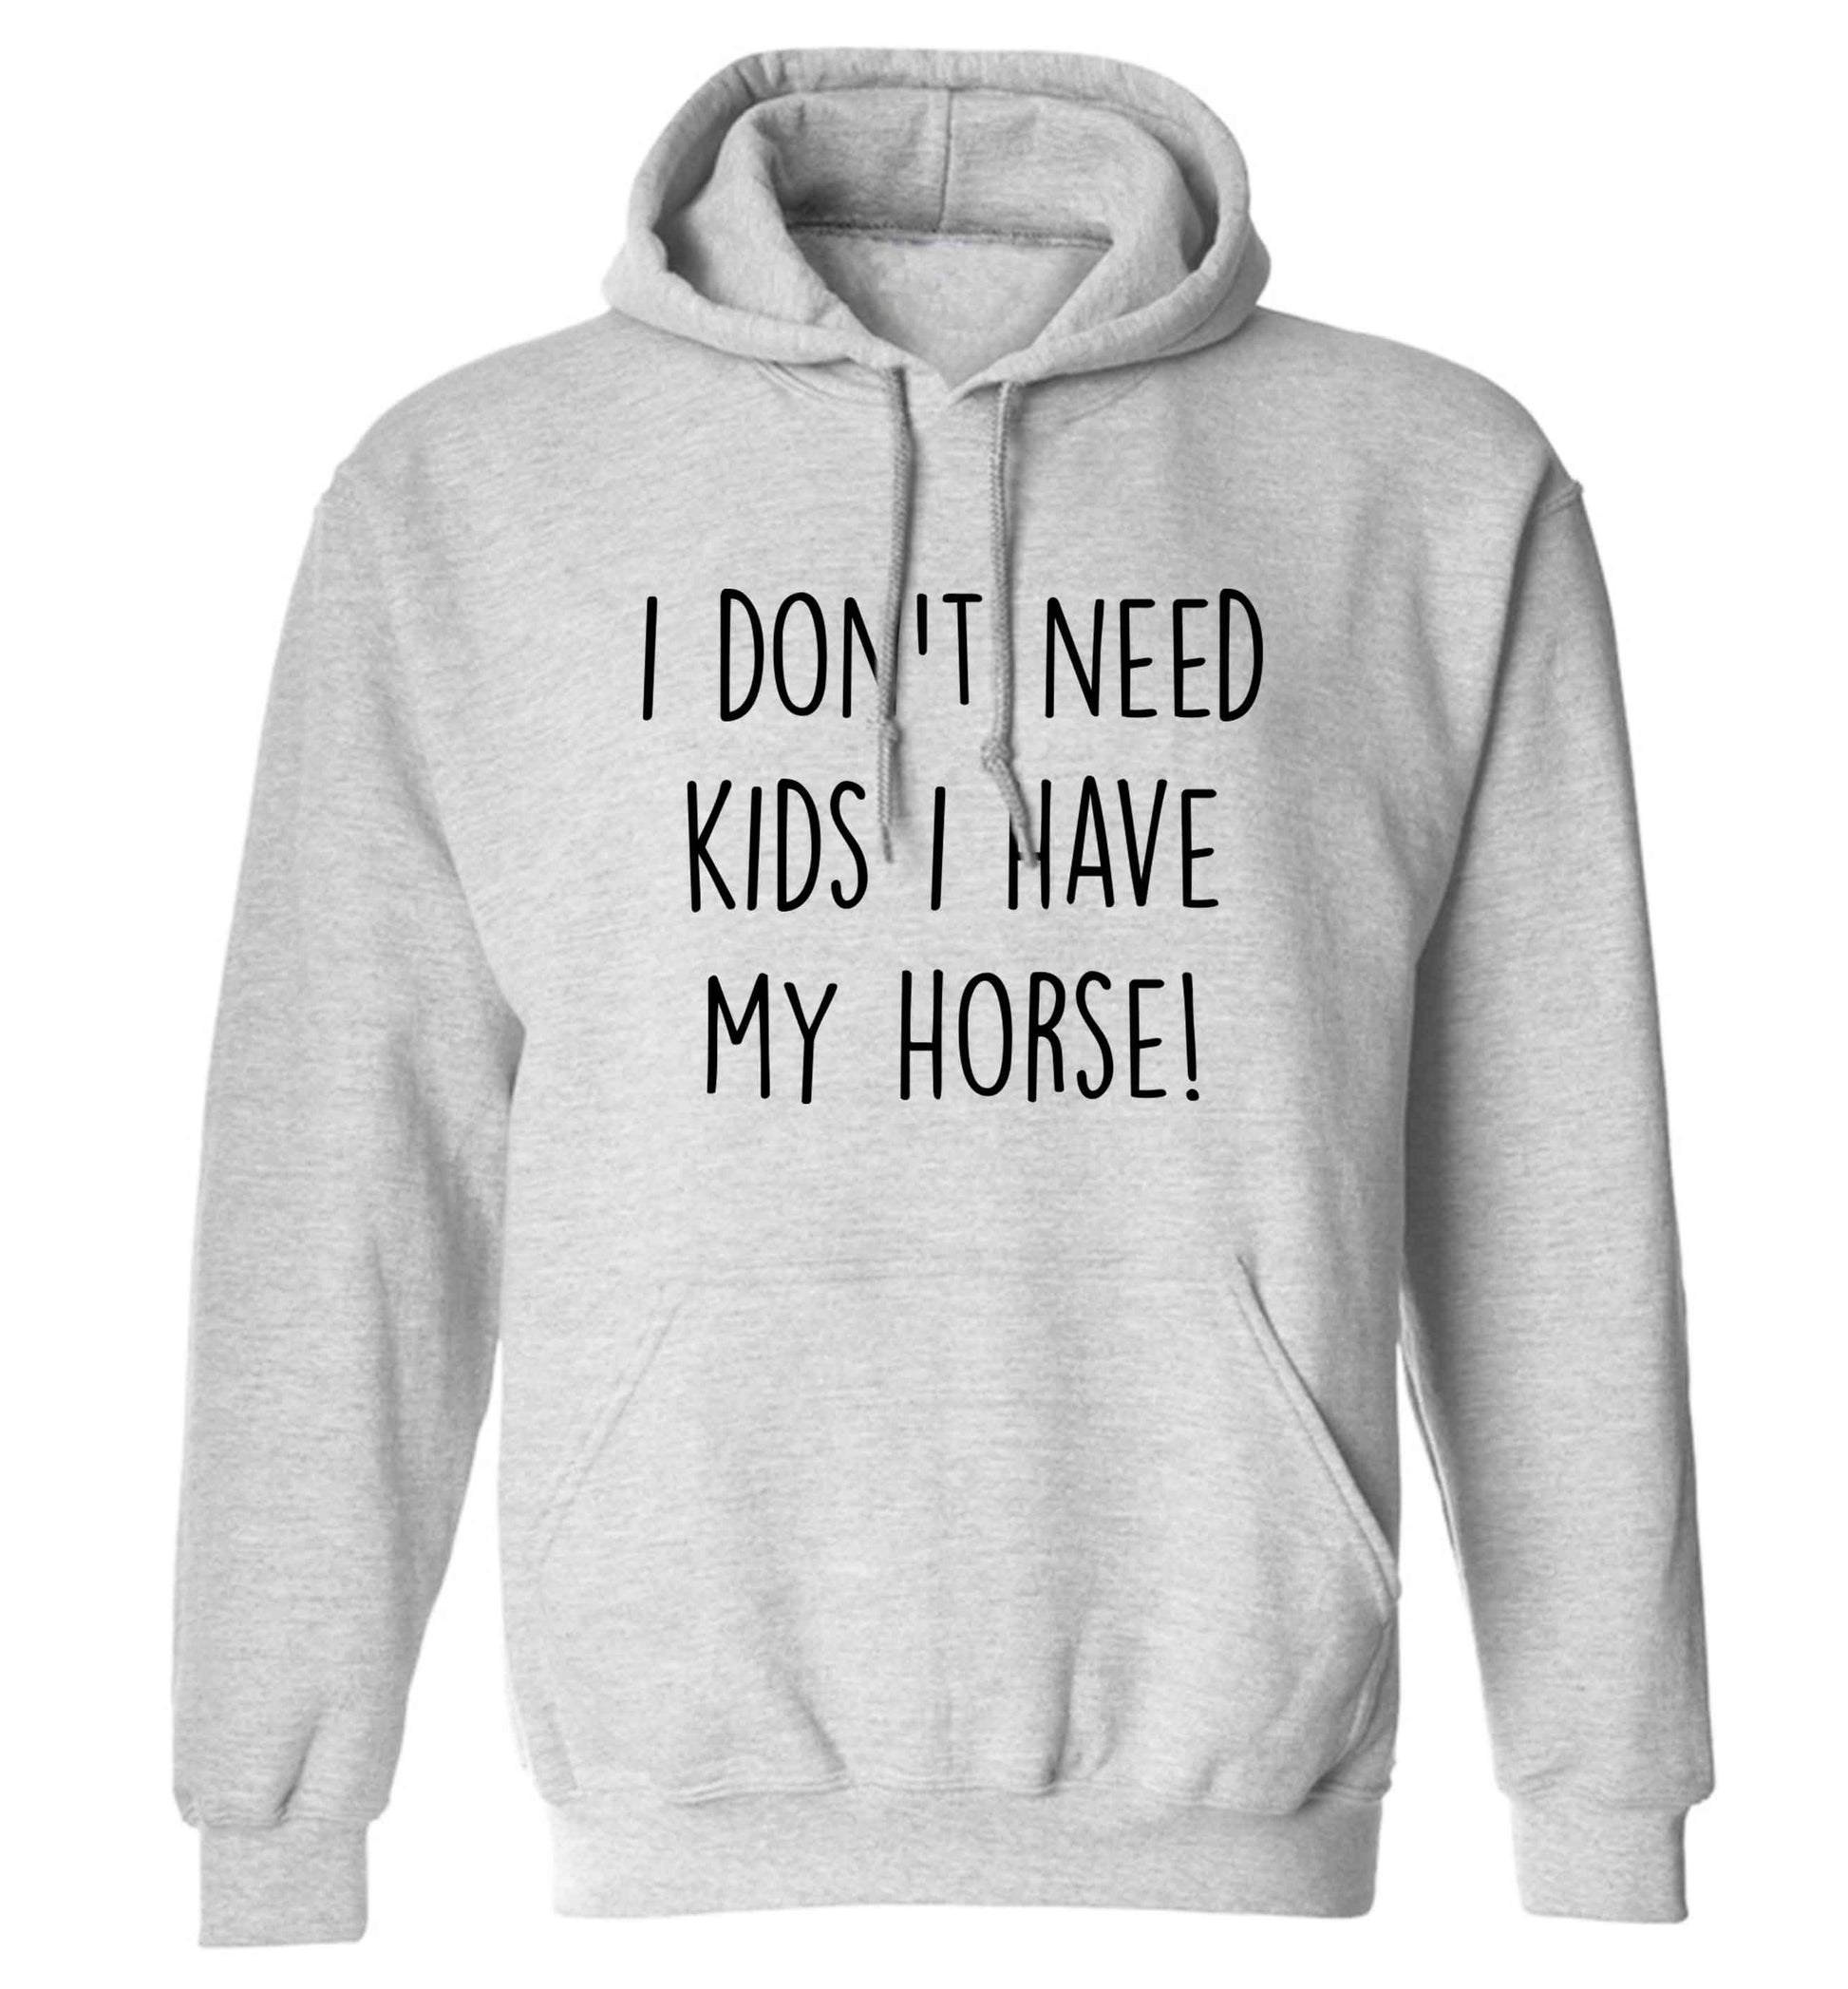 I don't need kids I have my horse adults unisex grey hoodie 2XL